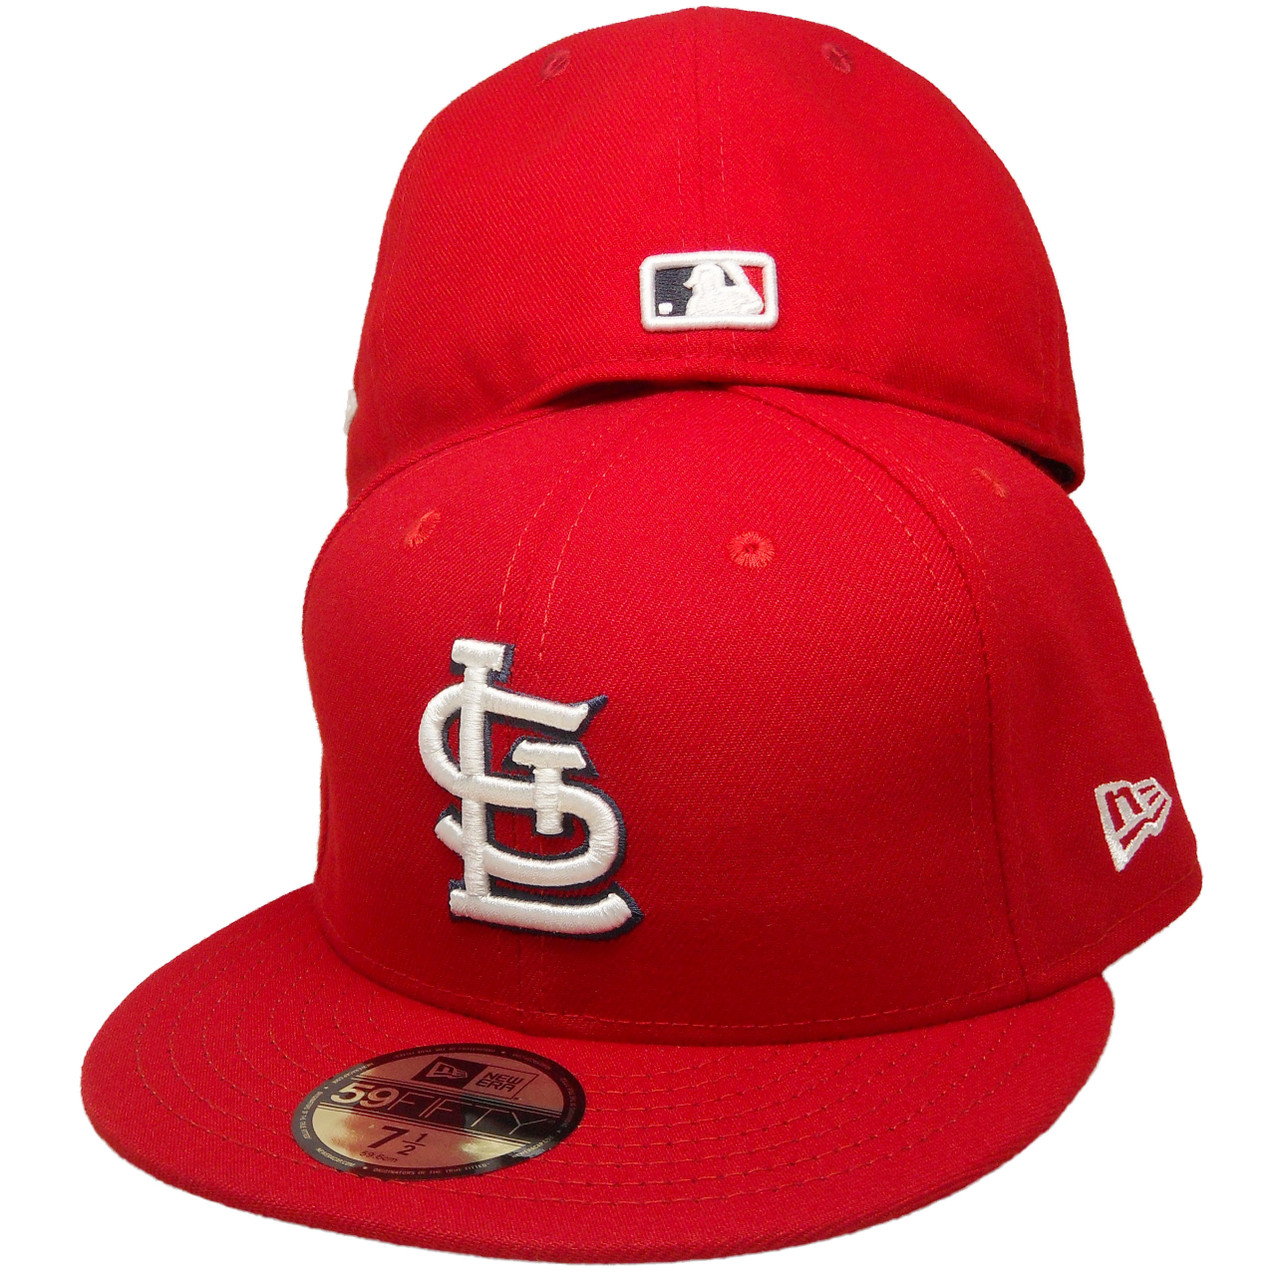 St Louis Cardinals New Era Onfield Official Fitted Hat Red White Navy Ecapsunlimited Com